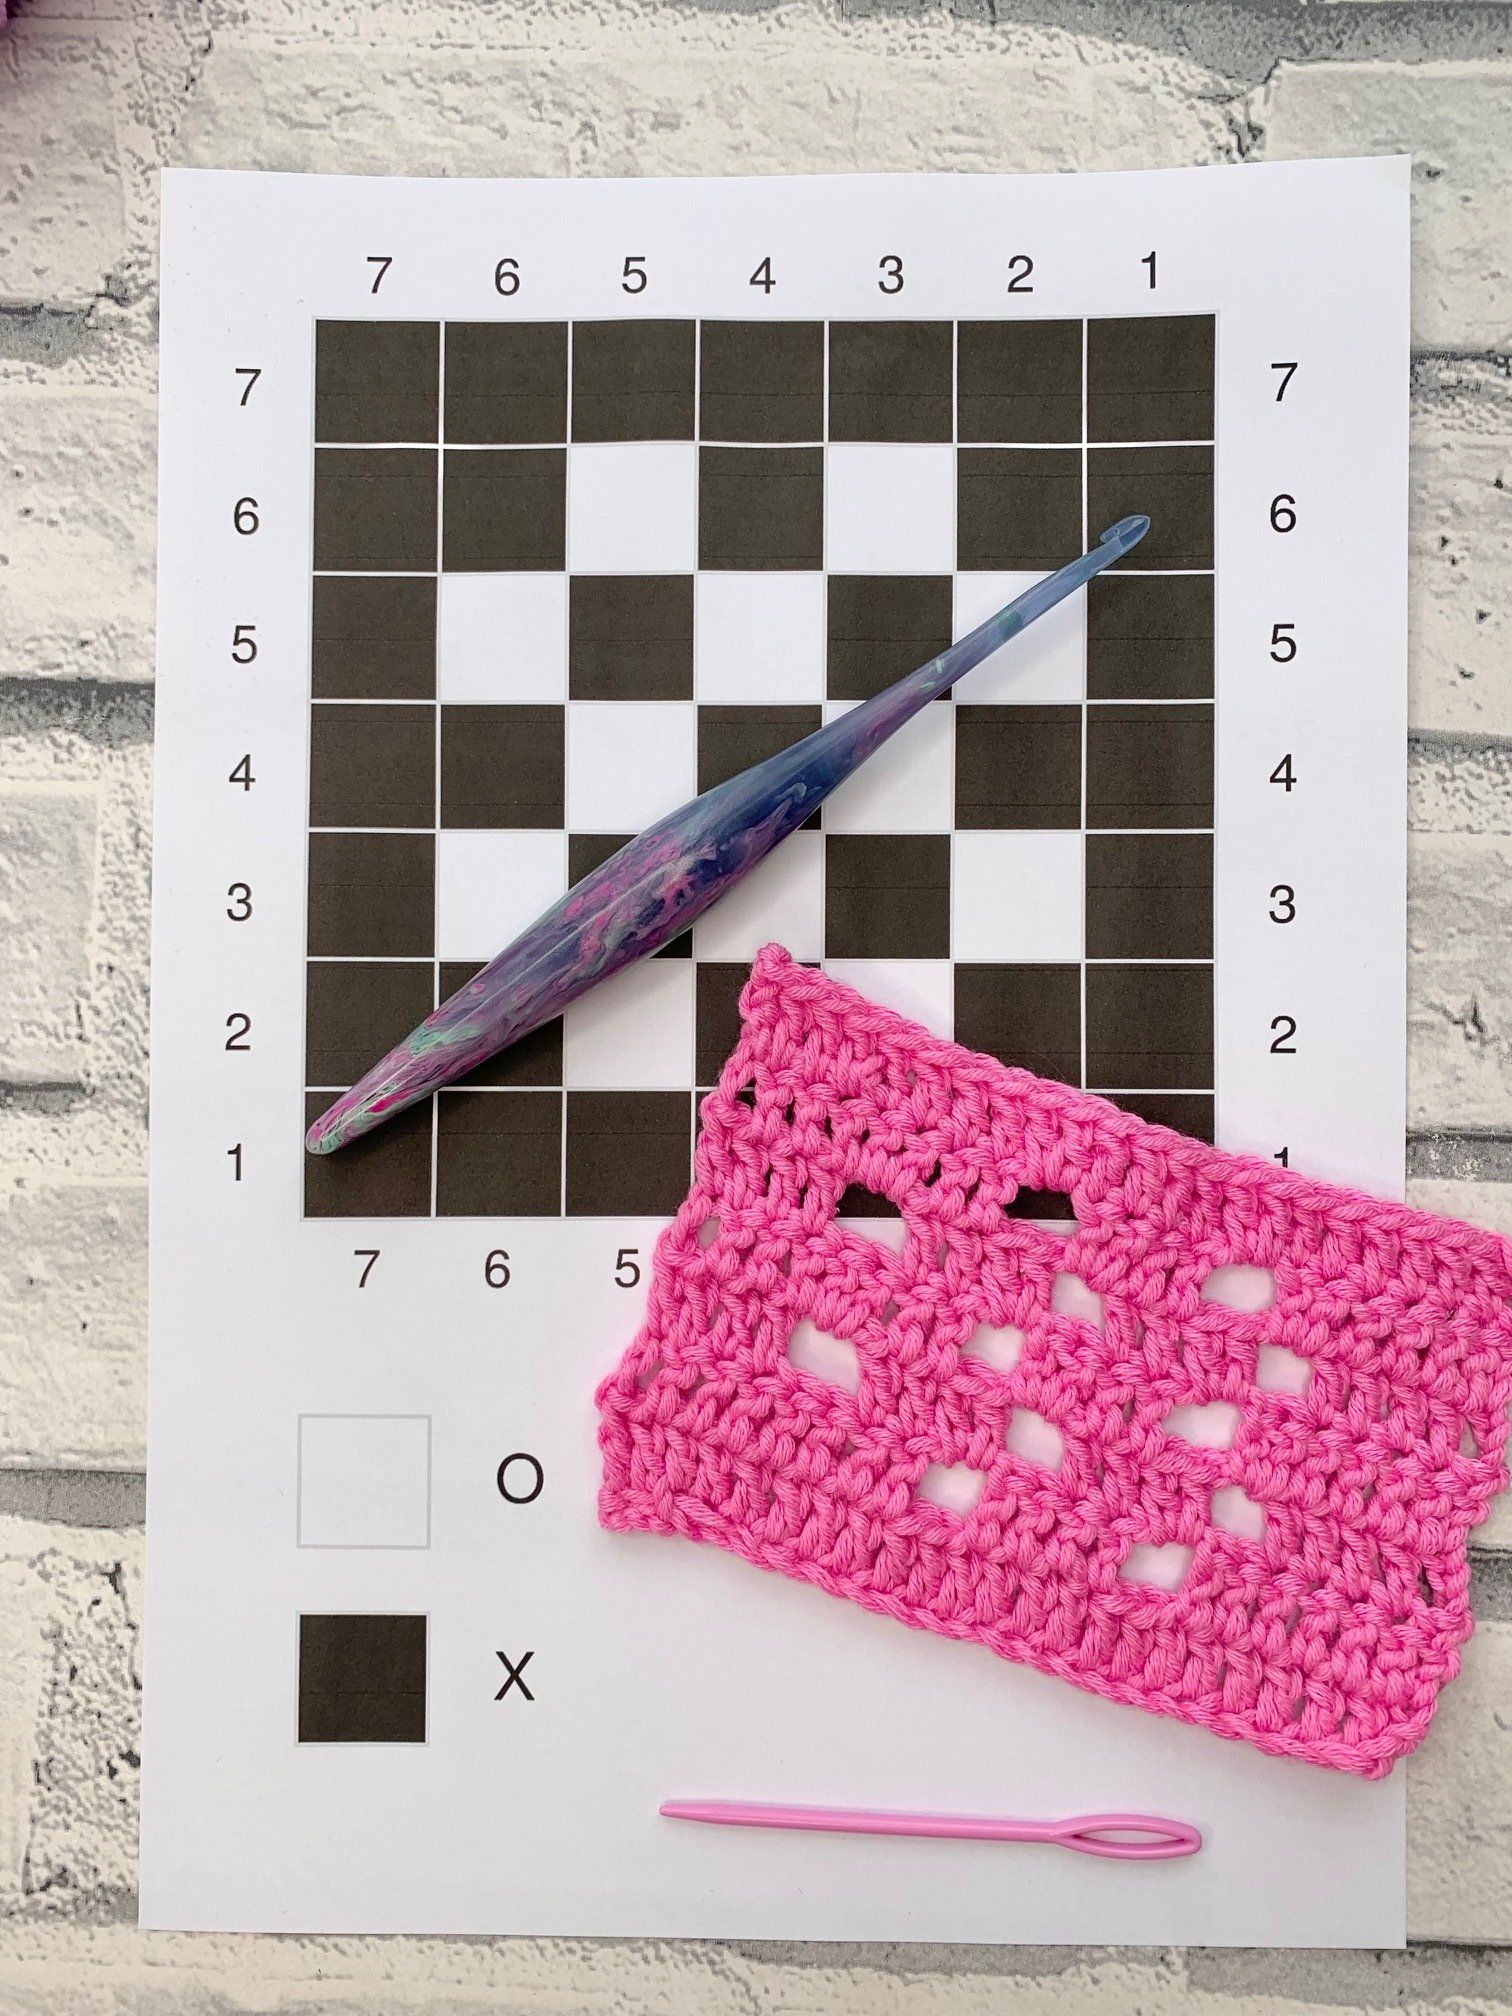 How to Read Crochet Patterns in Chart Form